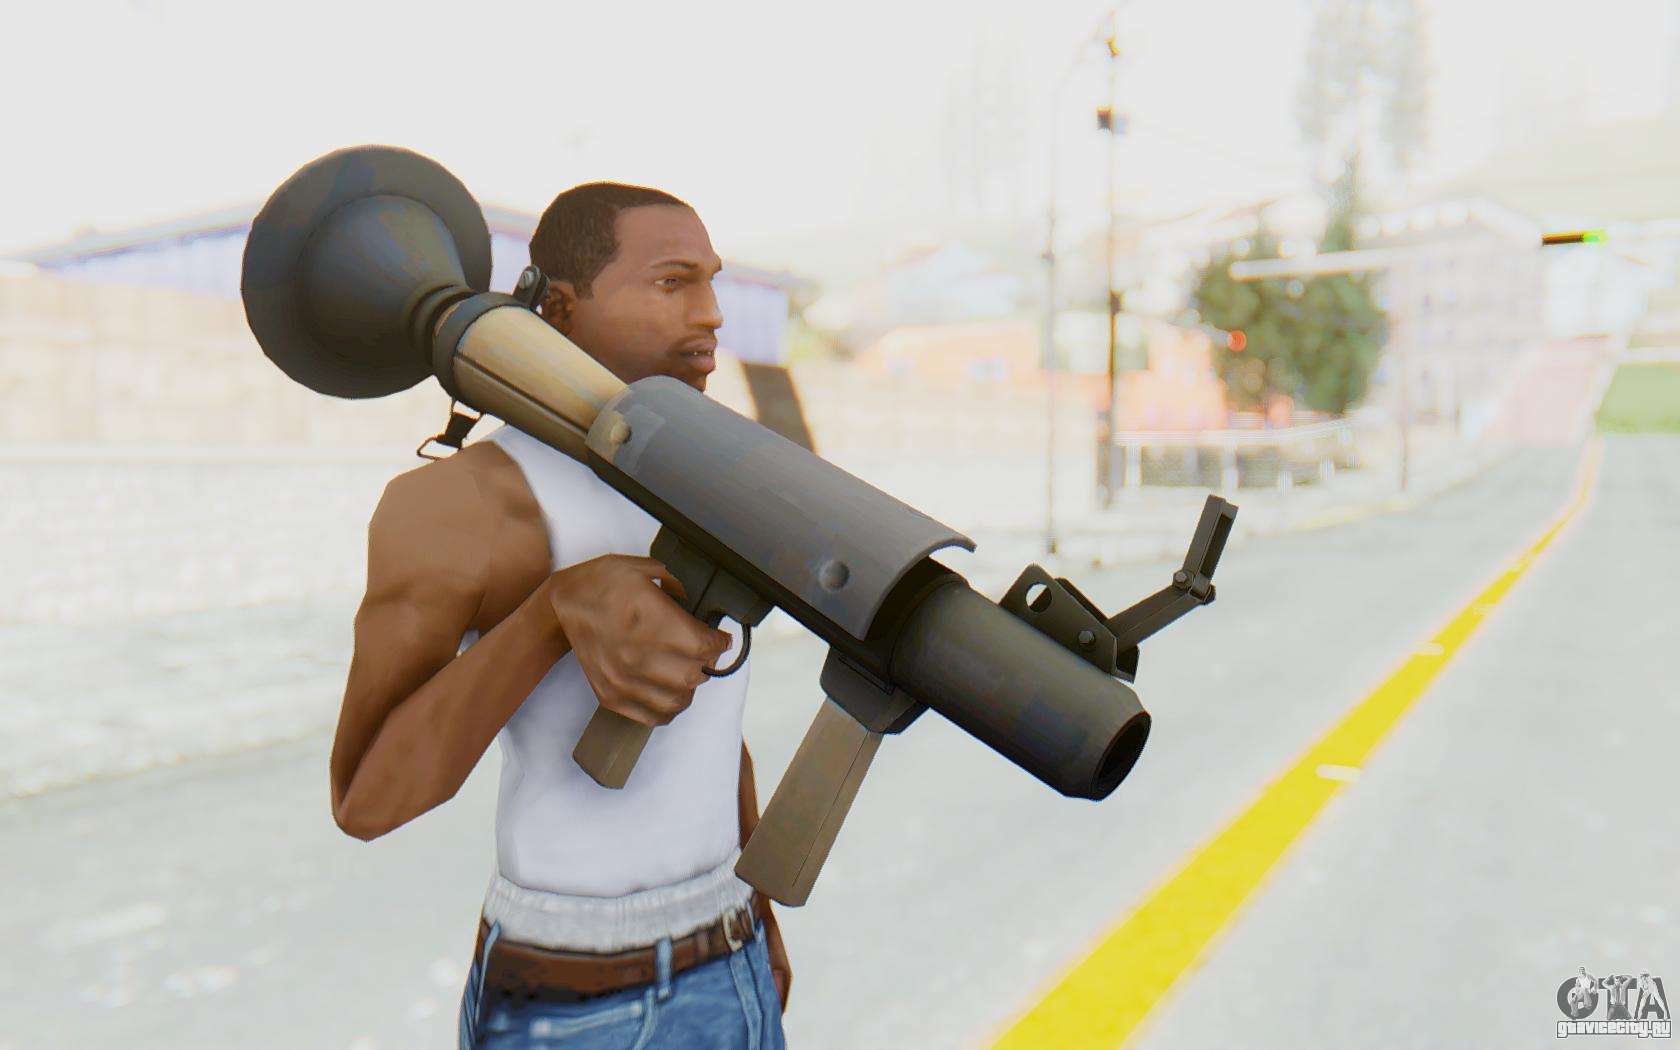 Rocket Launcher from TF2.